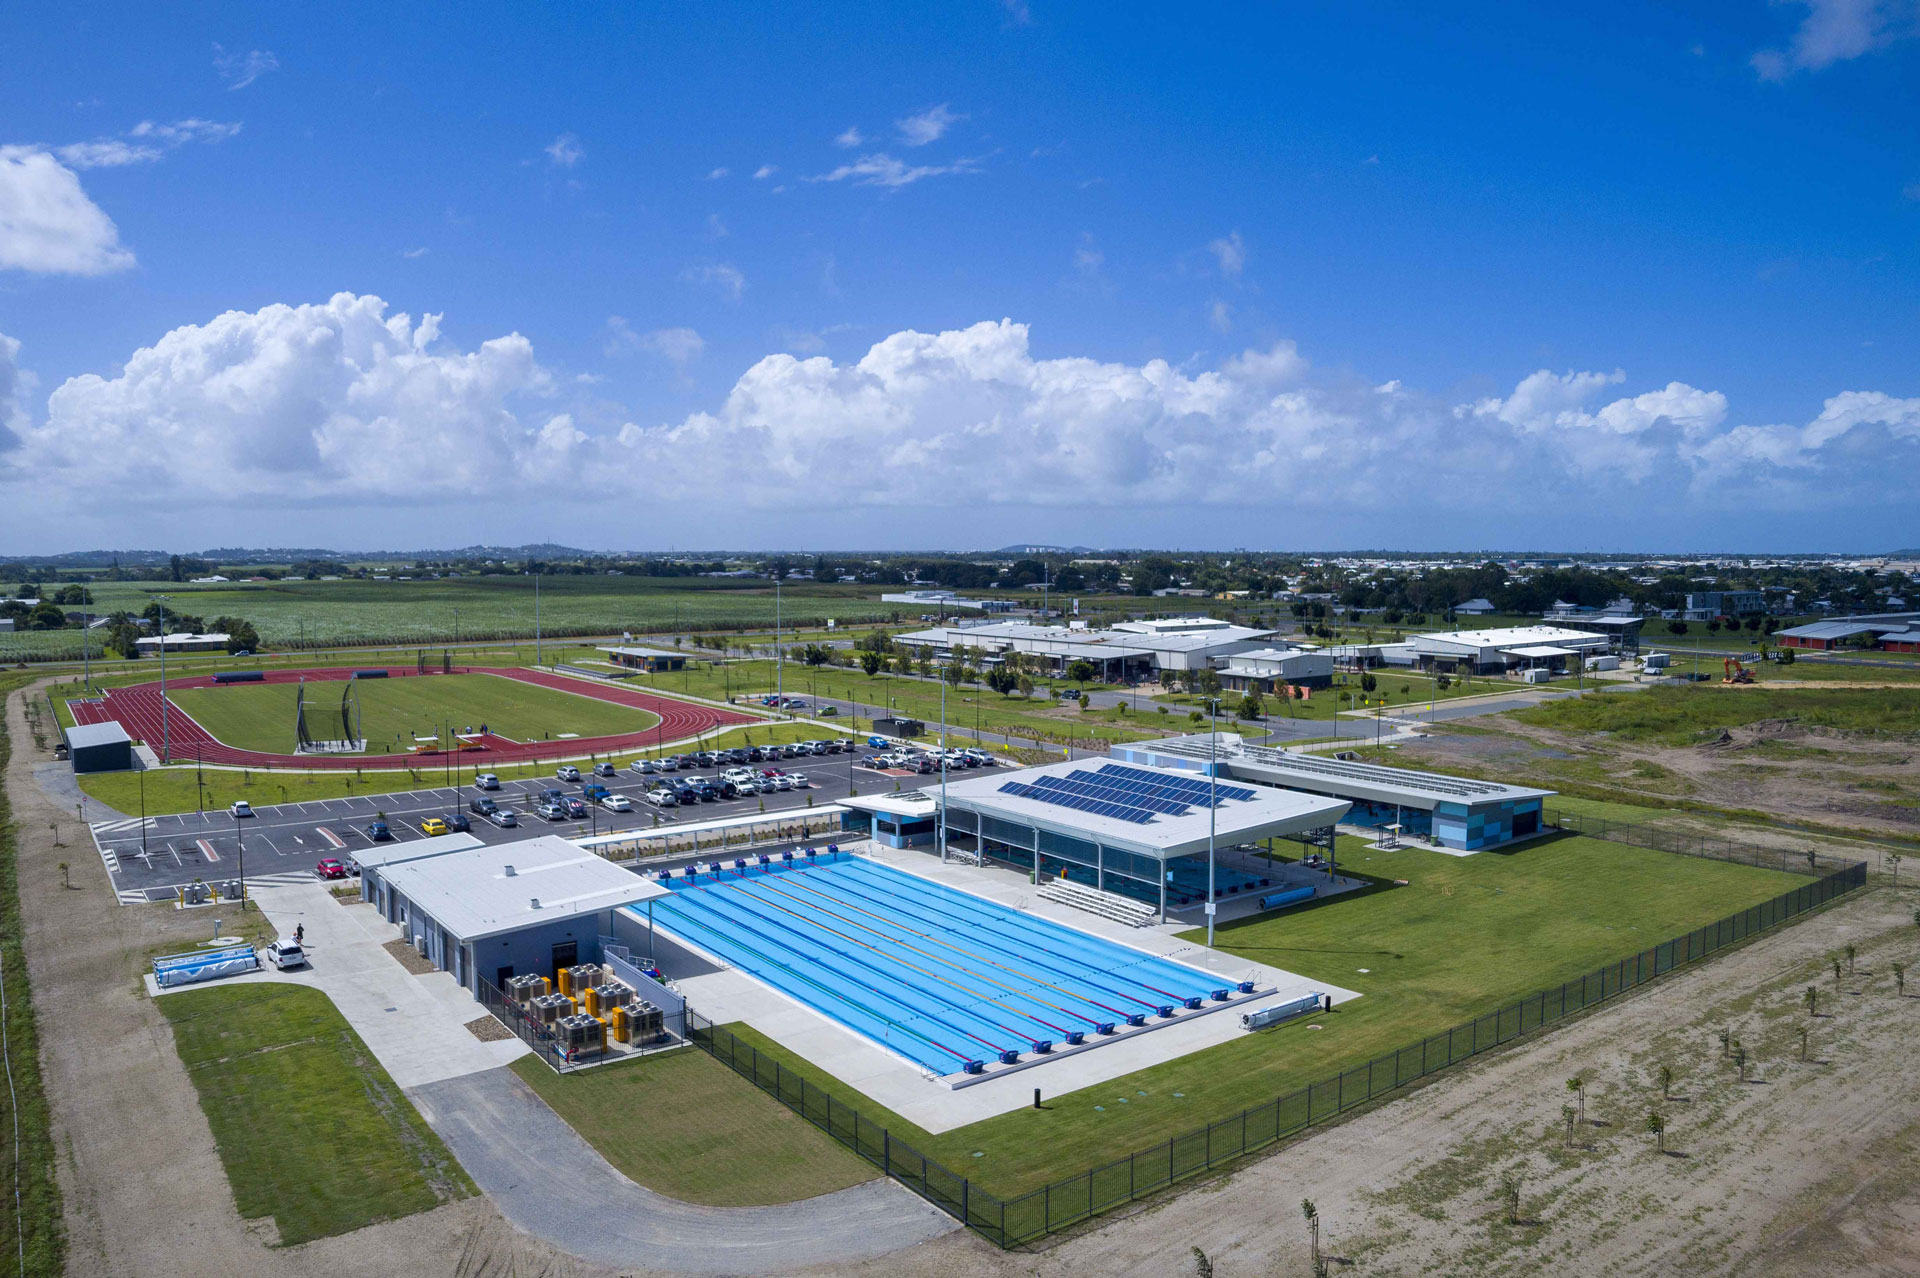 Sporting Facility over $10m